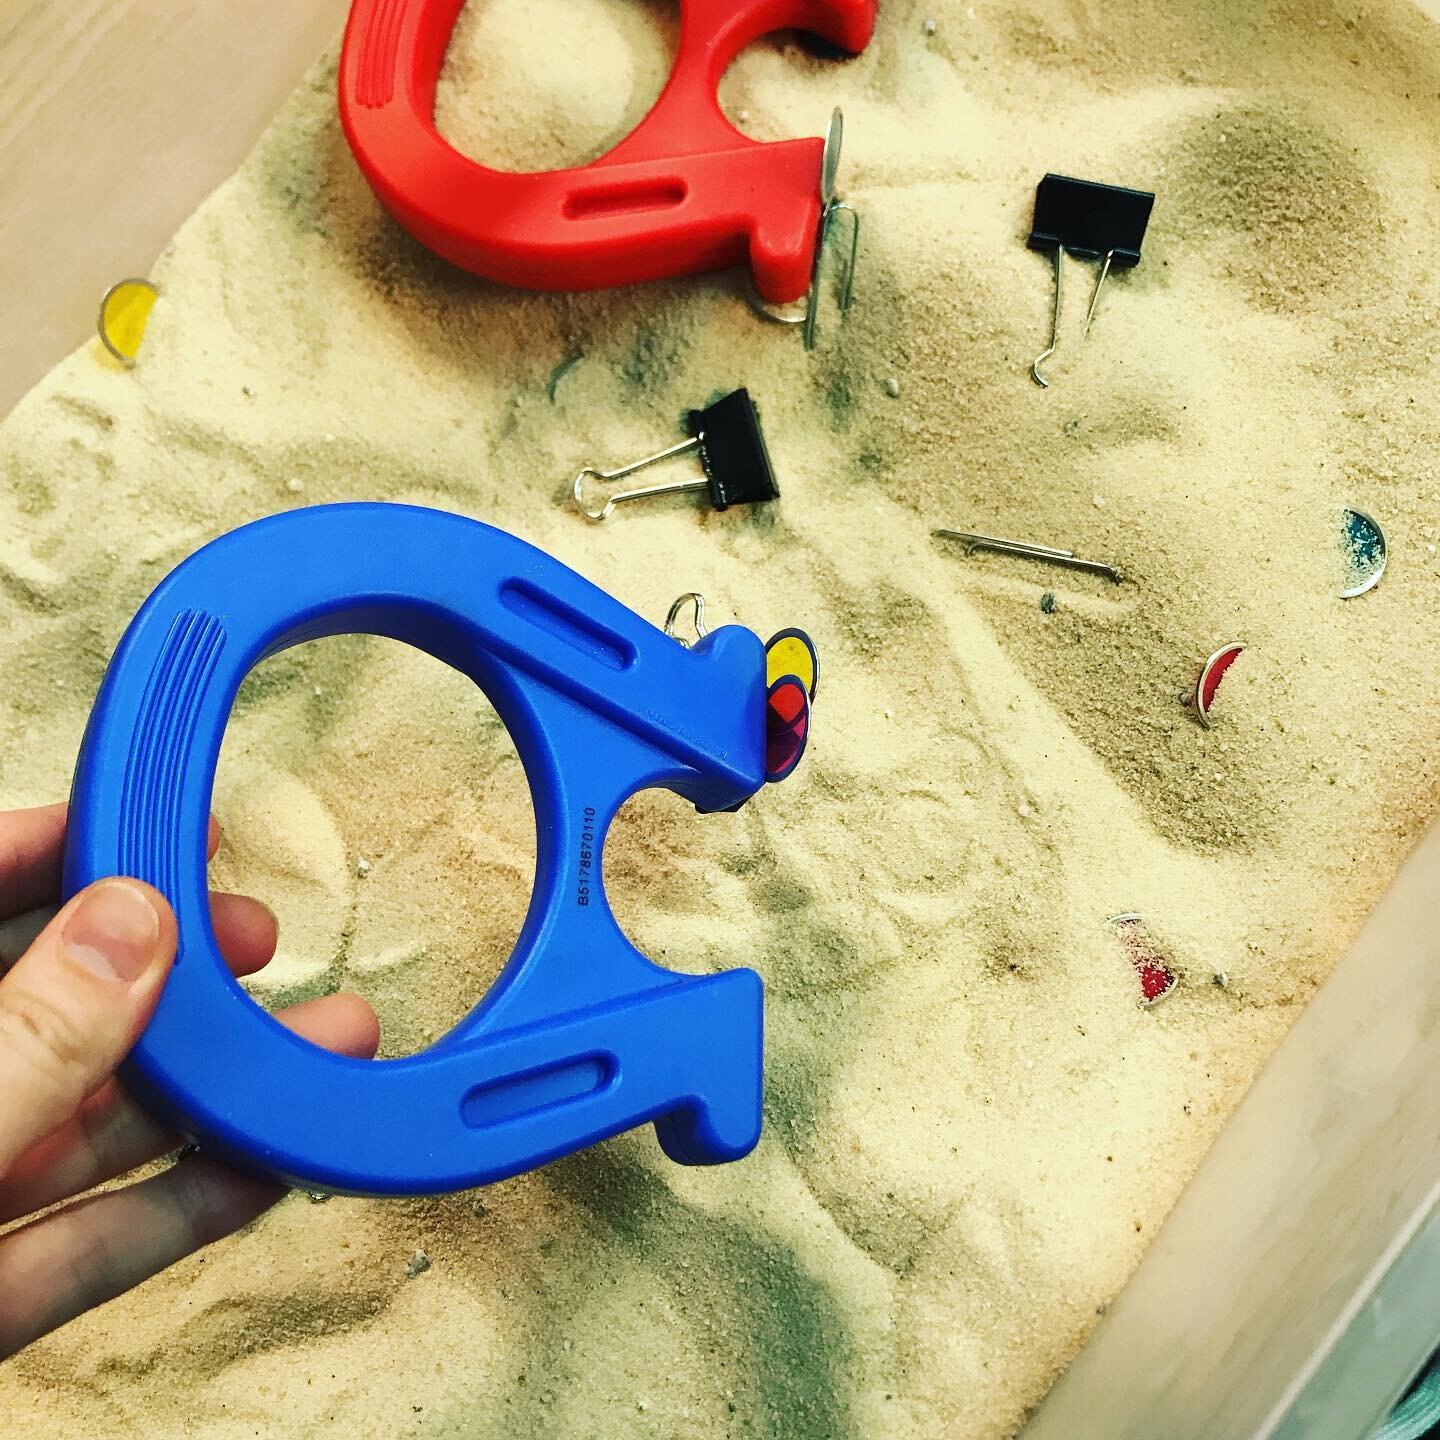 Exploring with magnets! .
.
#autism #autismclassroom #sped #spedteacher #spedsquad #specialeducation #specialeducationteacher #specialedclassroom #autismteacher #sensoryplay #sensorybin #sensoryplayideas #magnet #magnets